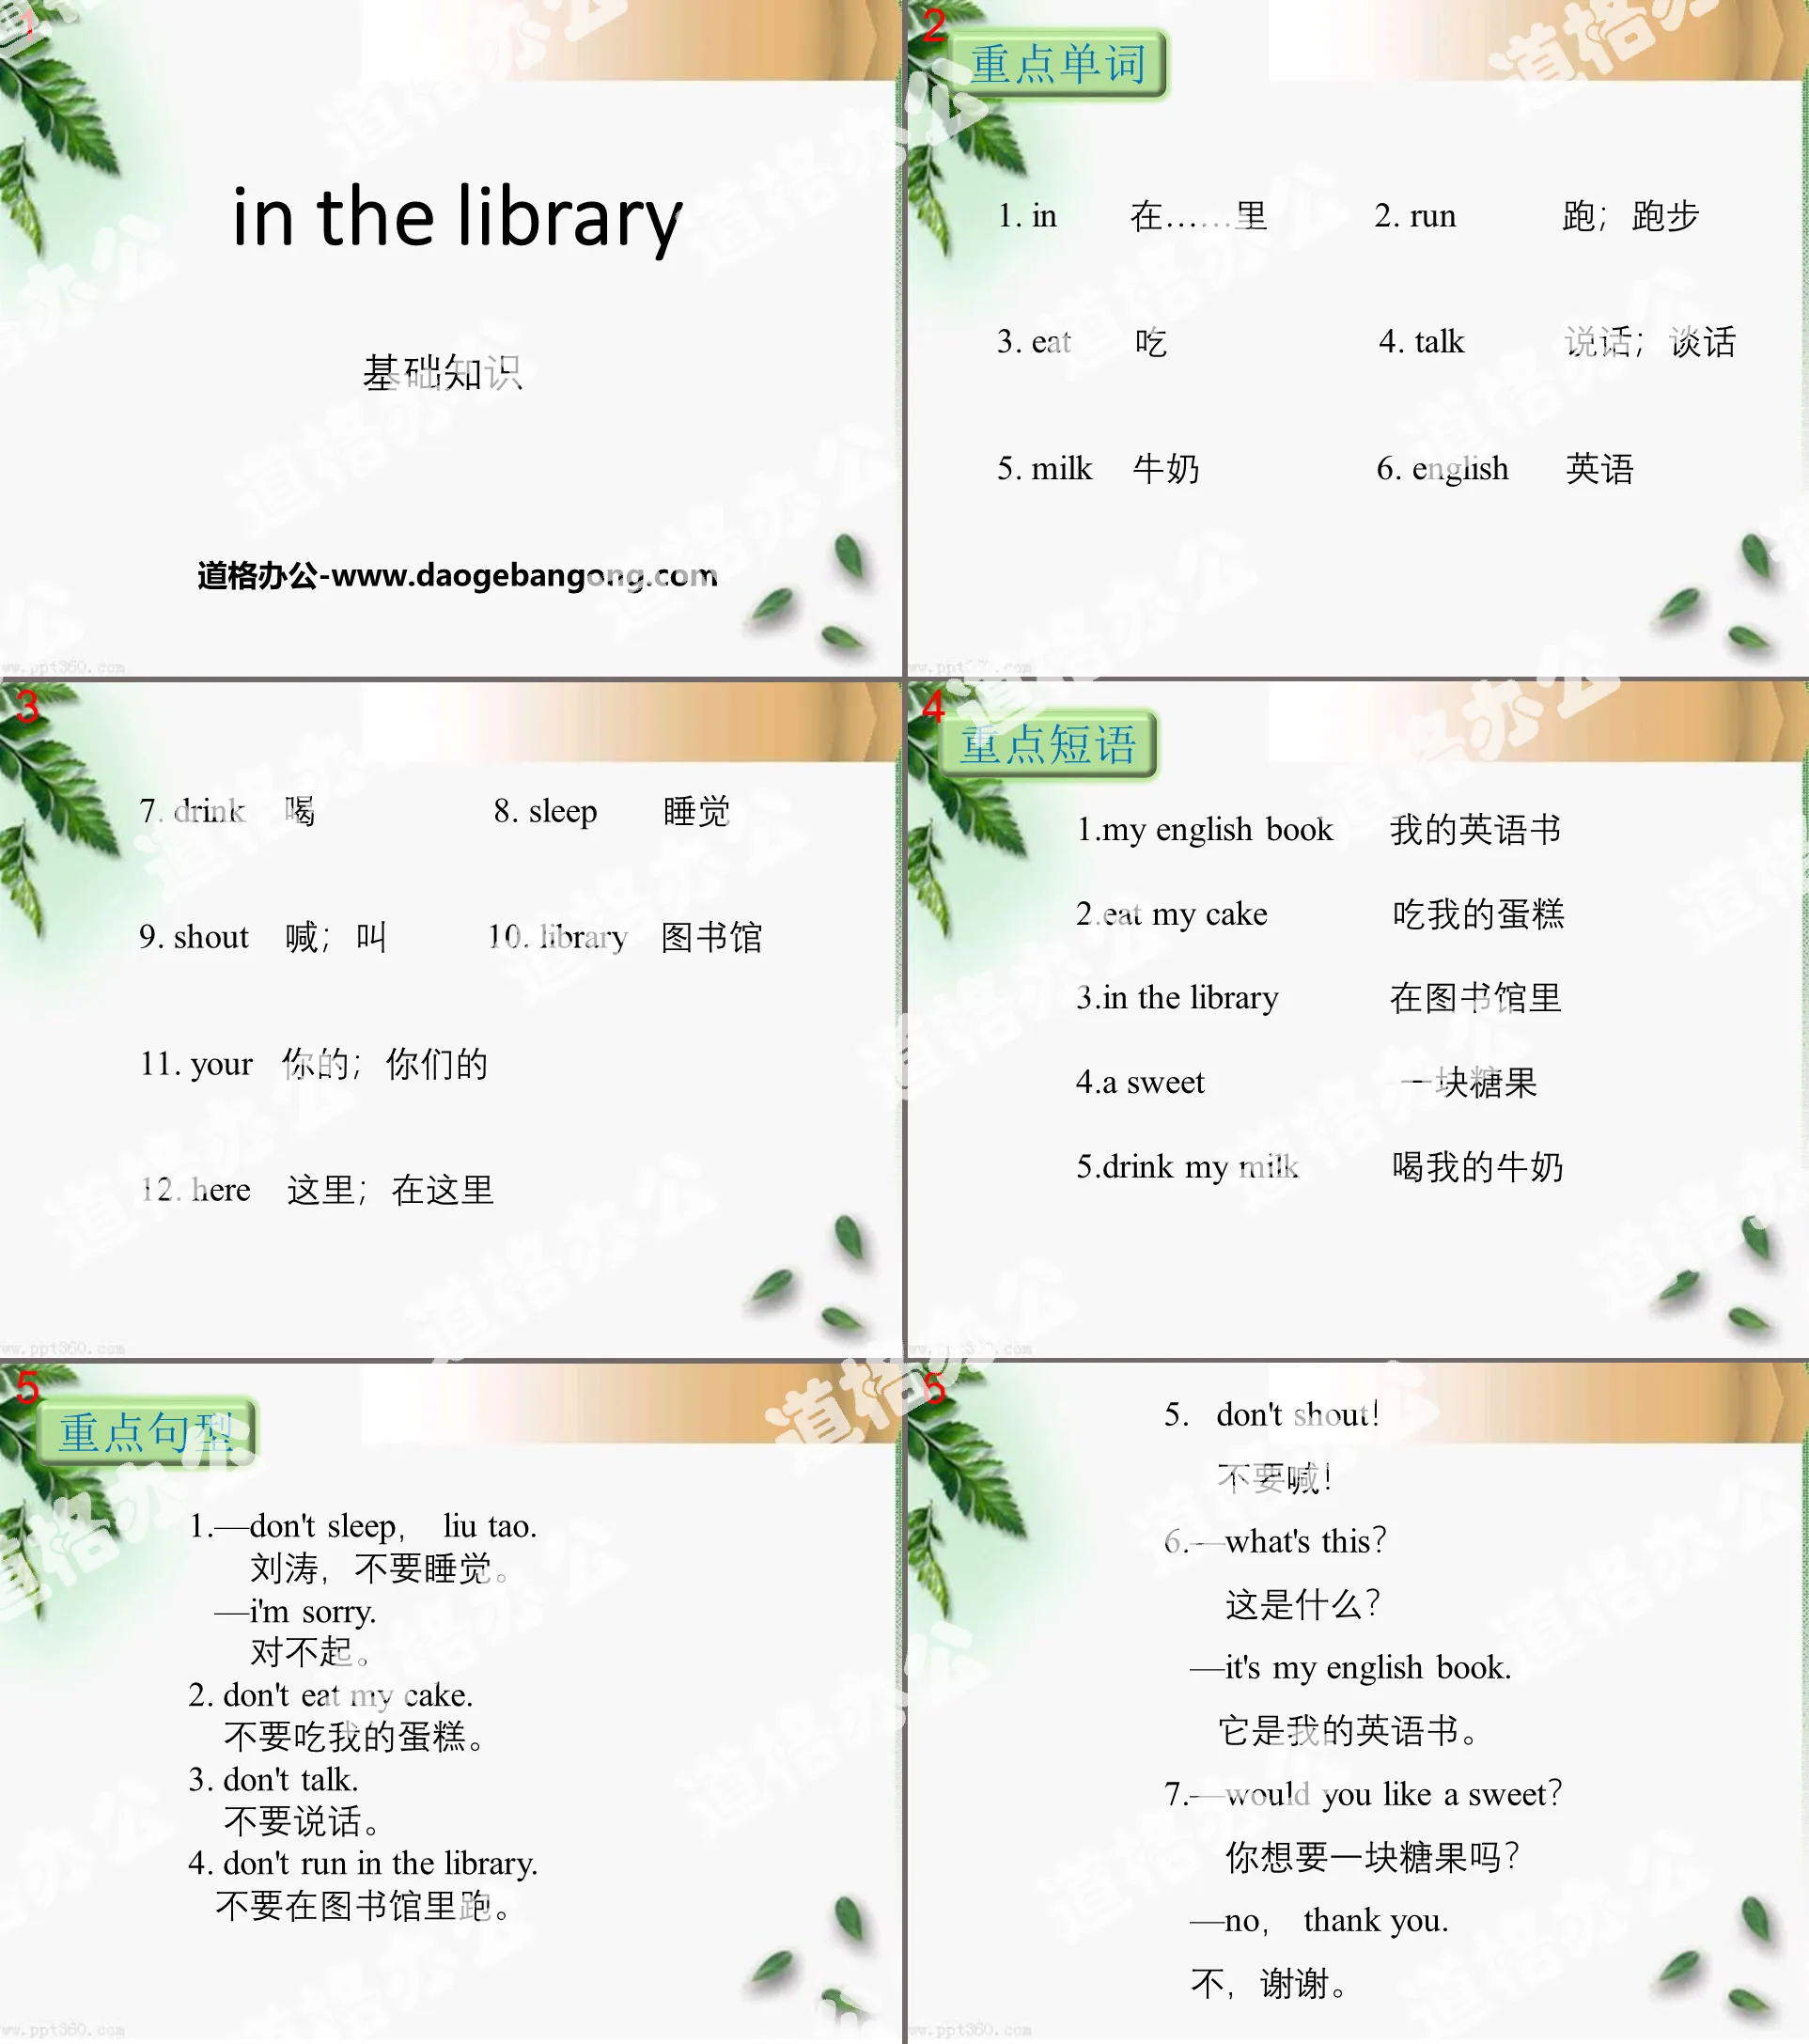 《In the library》基础知识PPT
